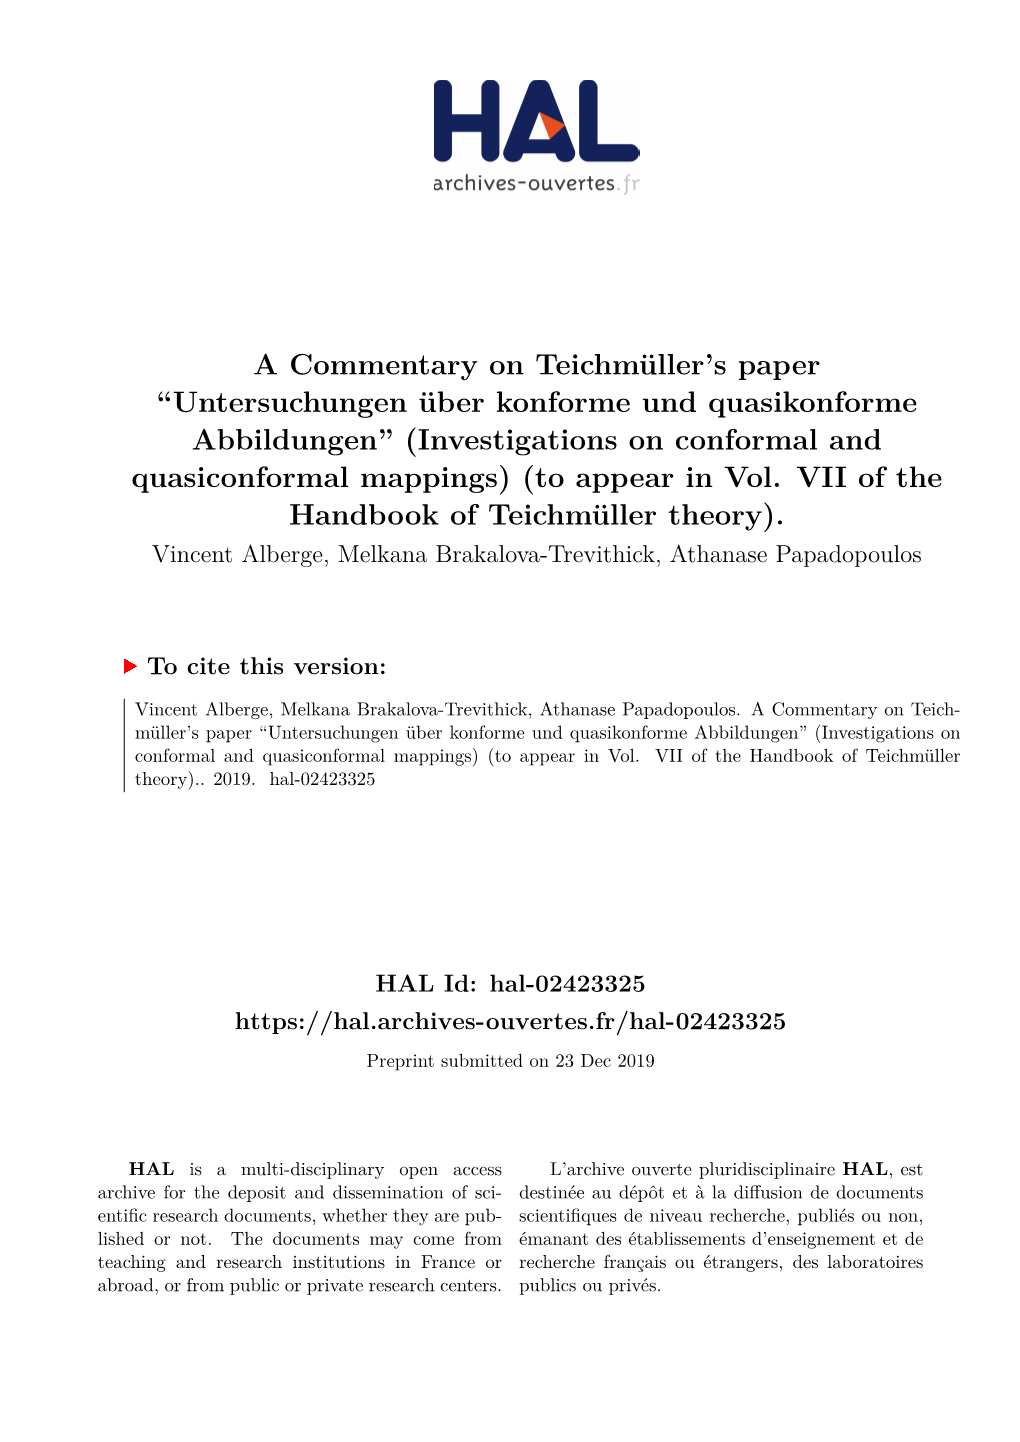 A Commentary on Teichmüller's Paper